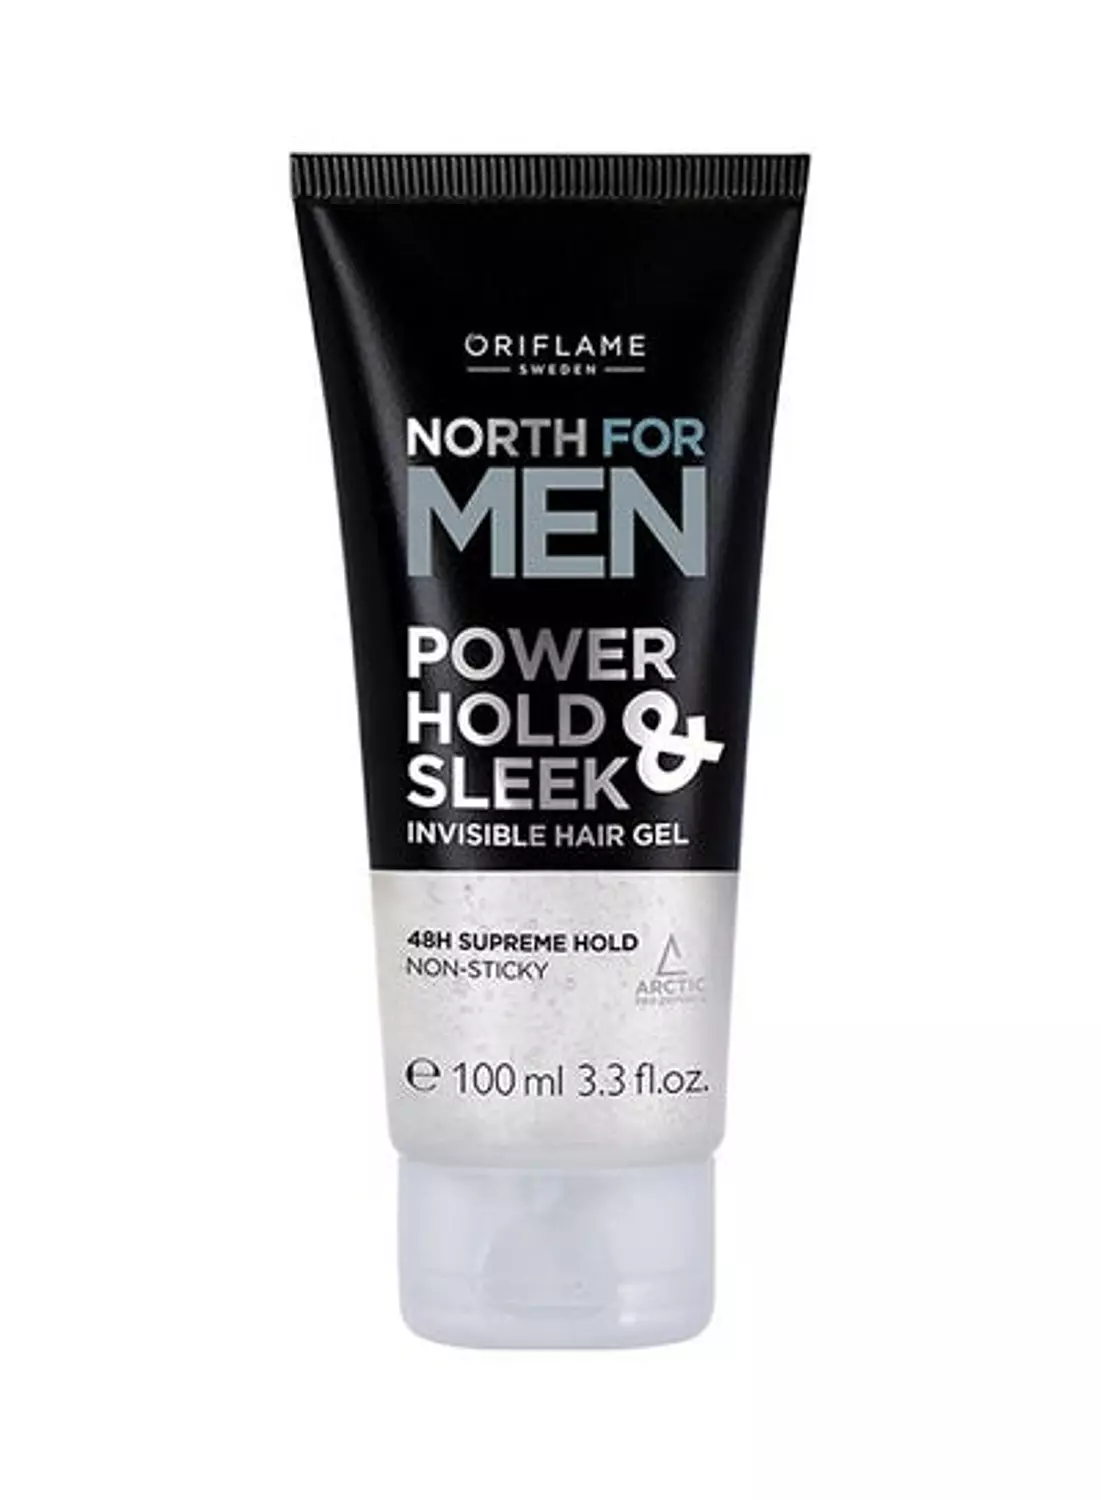 North For Men Invisible Hair Gel hover image